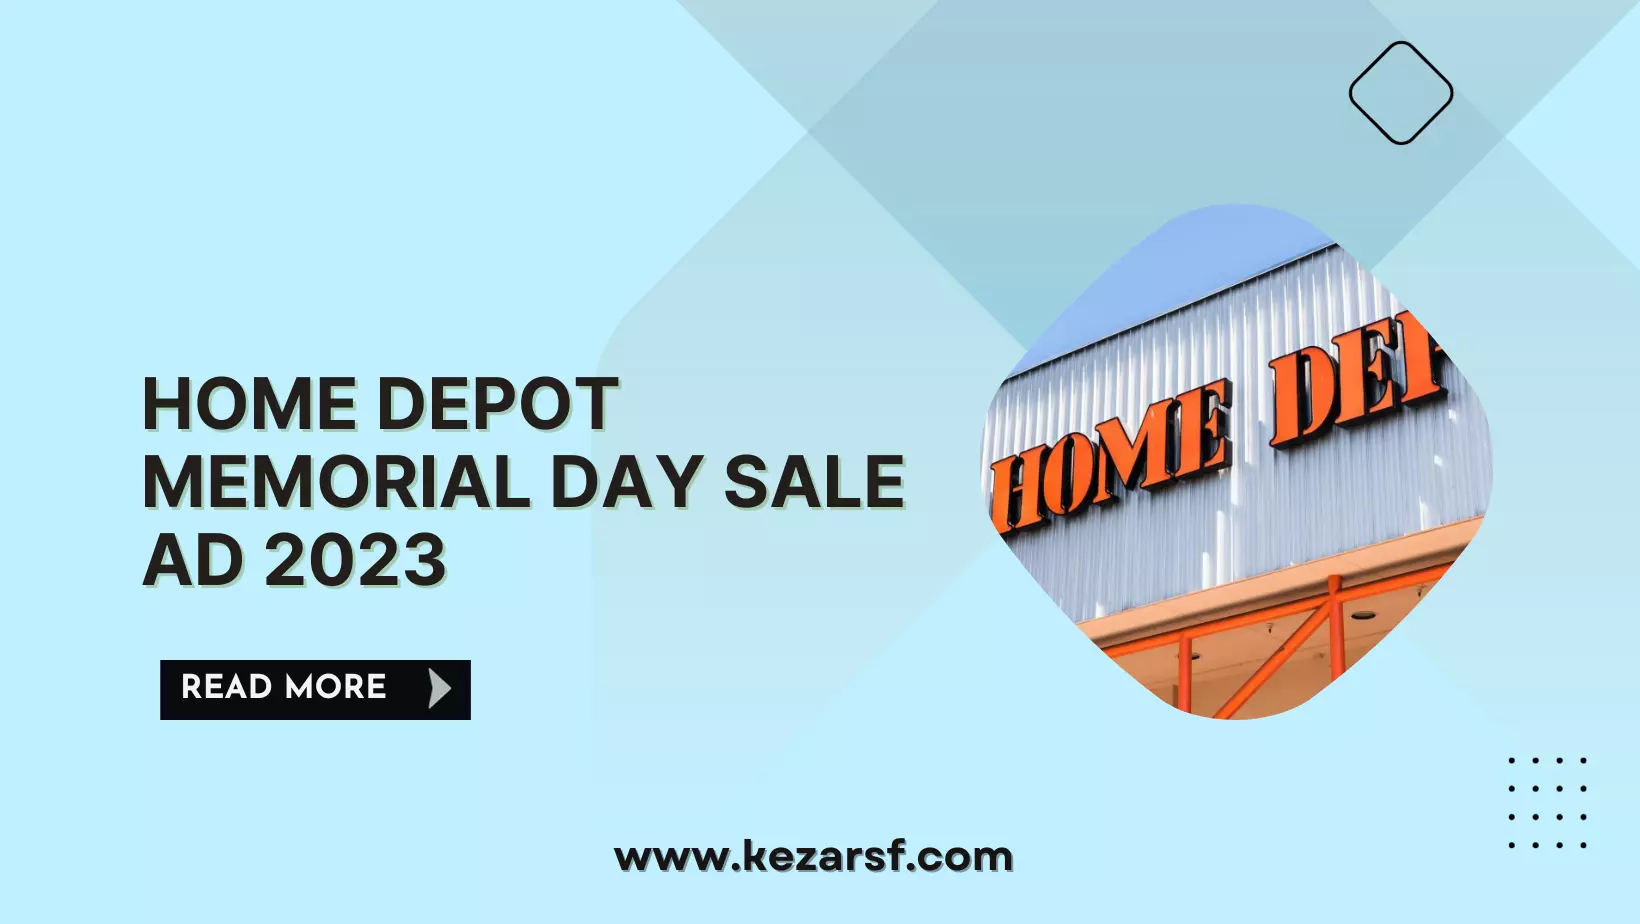 Home Depot Memorial Day Sale ad 2023